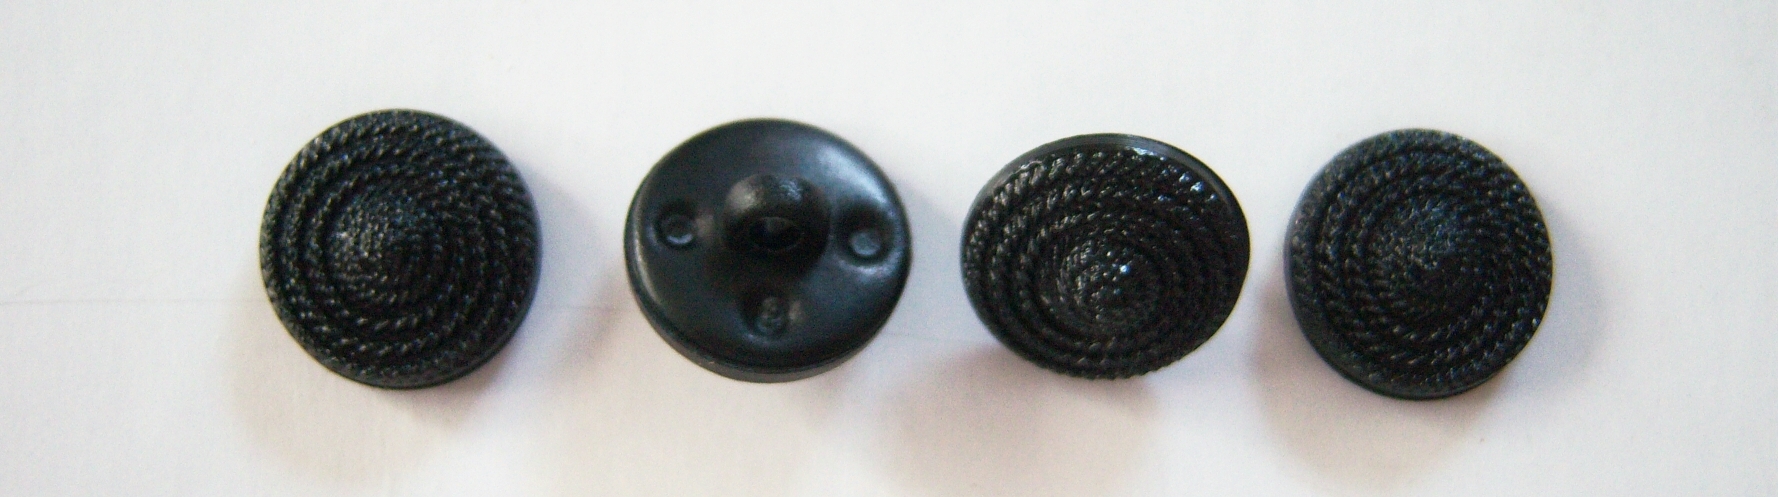 Black Rope Rings 1/2" Poly Button